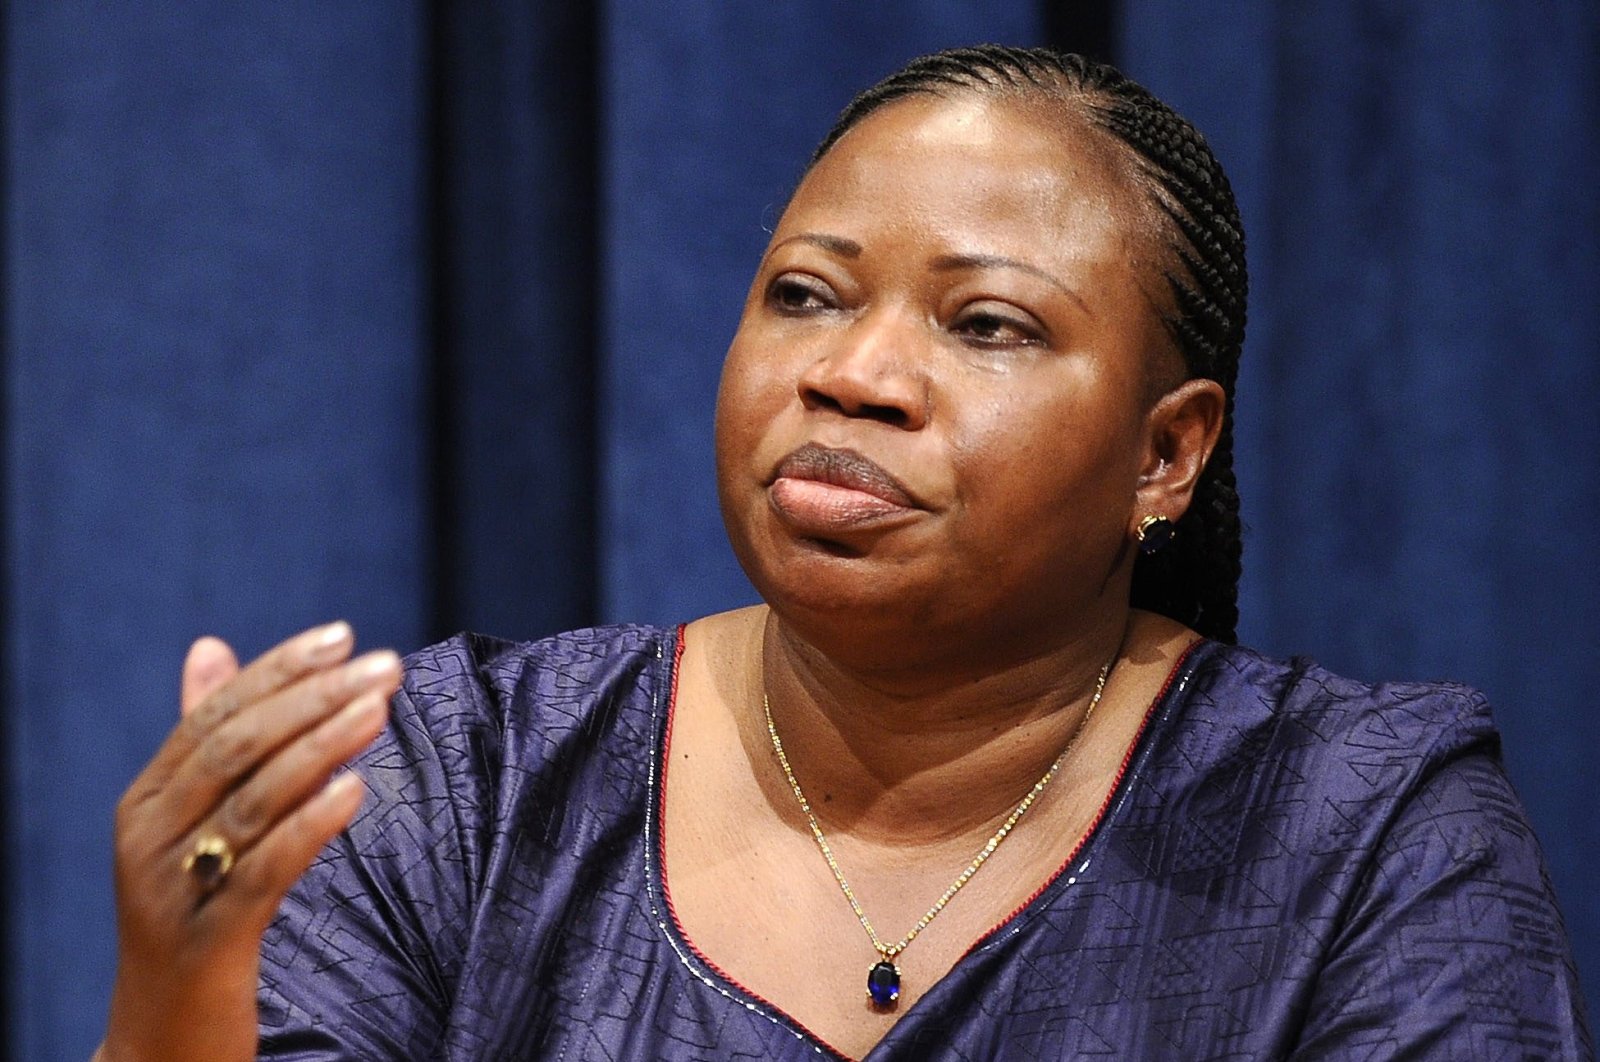 Fatou Bensouda, International Criminal Court (ICC) chief prosecutor elect, holds a press conference at the United Nations headquarters, New York, Dec. 12, 2011. (AFP Photo)